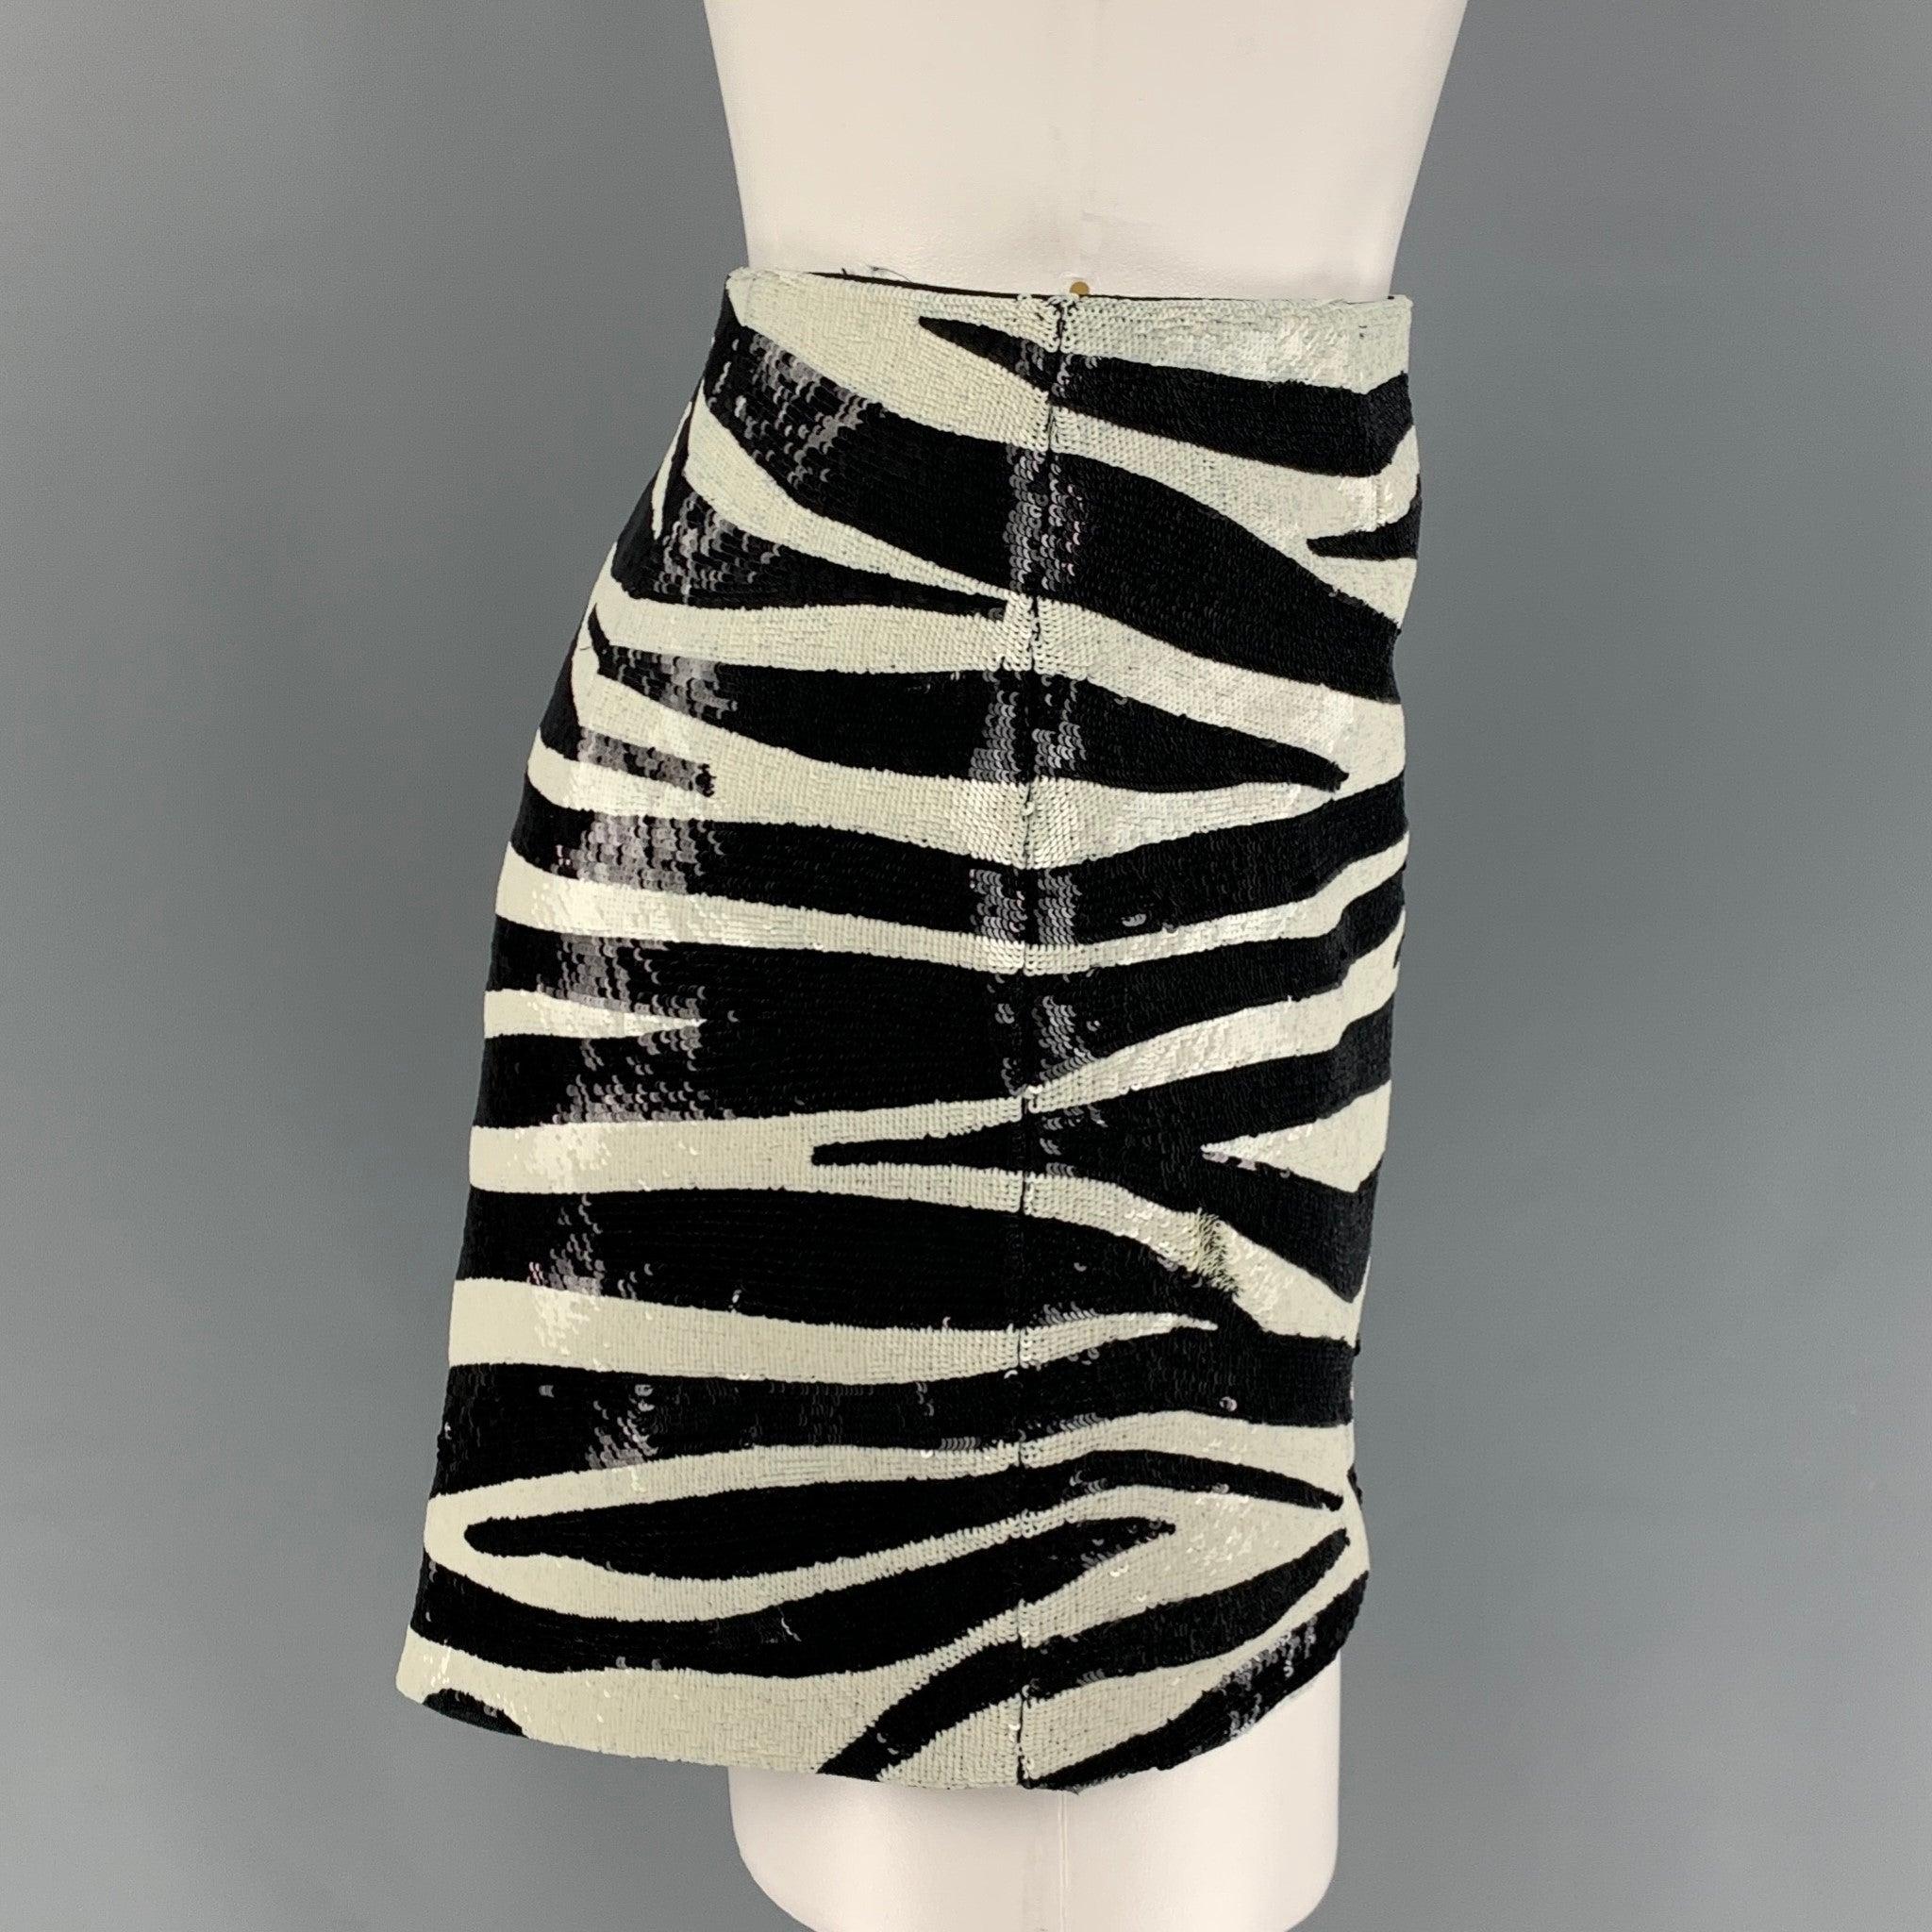 SAINT LAURENT mini skirt comes in a black & white zebra print acetate / viscose featuring an asymmetrical hem and a hidden zip up closure. Made in Italy.
Excellent
Pre-Owned Condition. 

Marked:   F 38 

Measurements: 
  Waist: 26 inches  Hip: 17